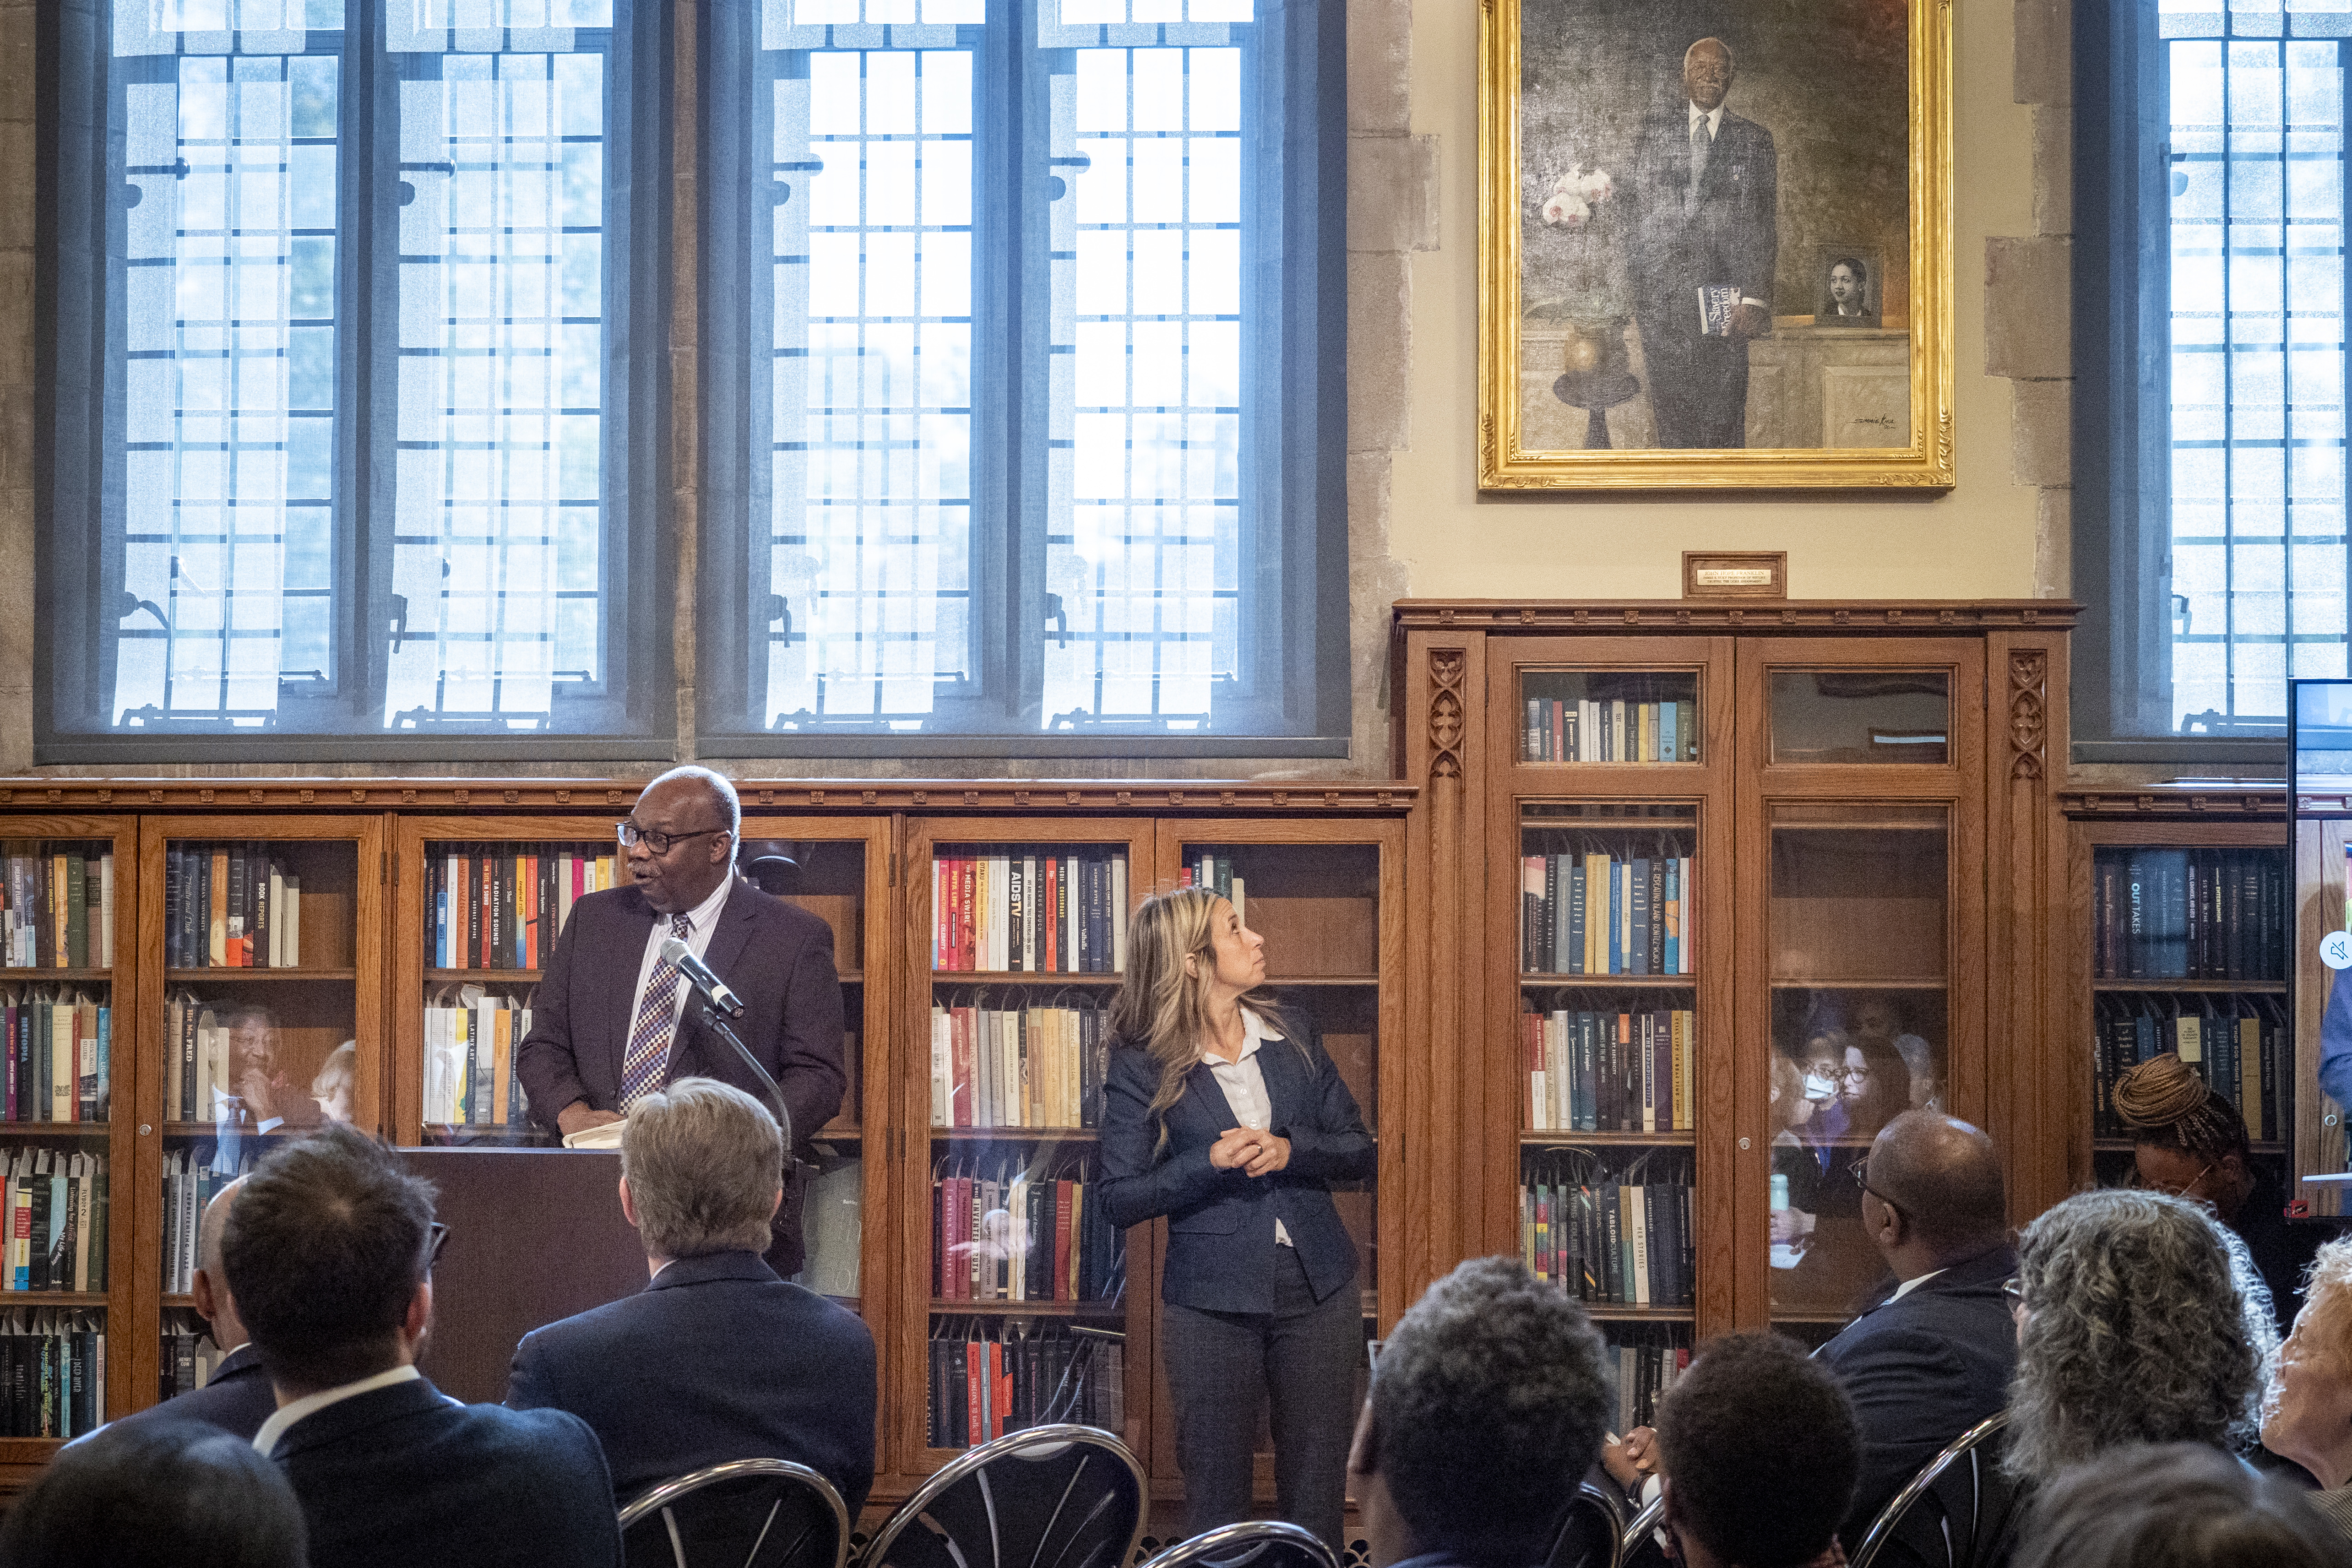 Dr. Kerry Haynie, speaks from a podium. He stands in front of a seated audience and behind him are the bookshelves and large windows of the Gothic Reading Room. To his right a sign language interpreter looks up and behind at a grand portrait of Dr. John Hope Franklin.